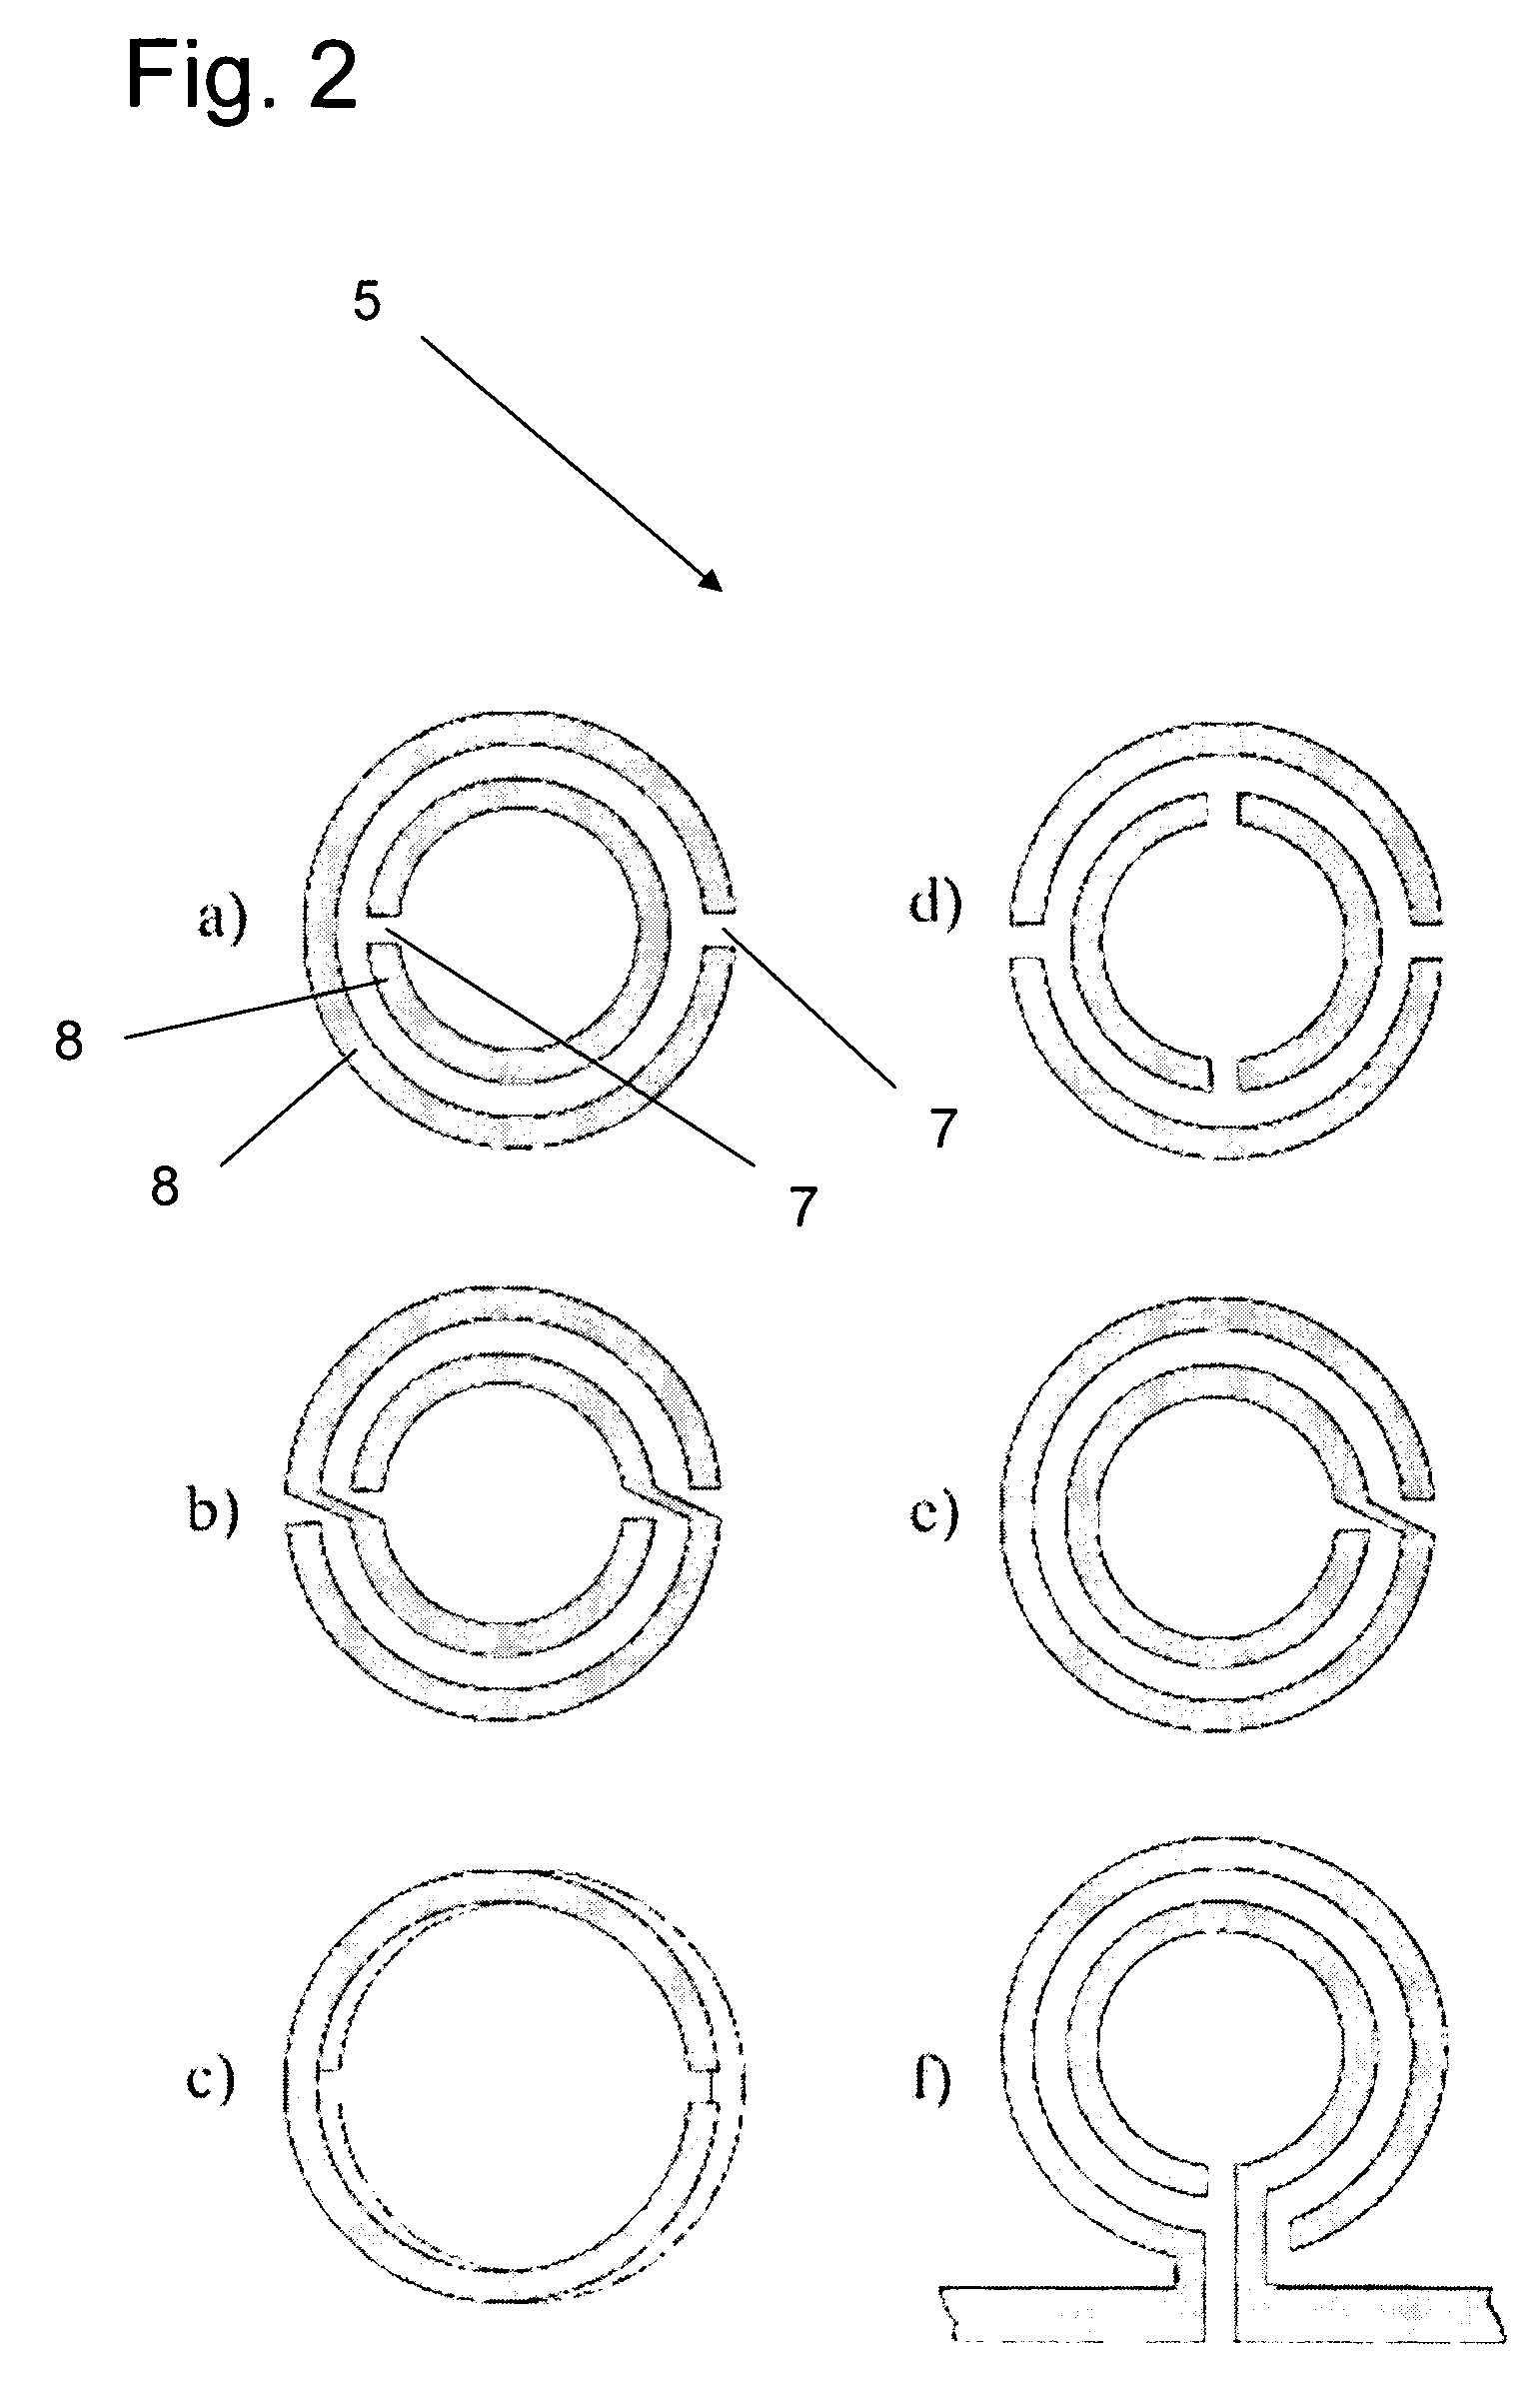 Filters and antennas for microwaves and millimetre waves, based on open-loop resonators and planar transmission lines